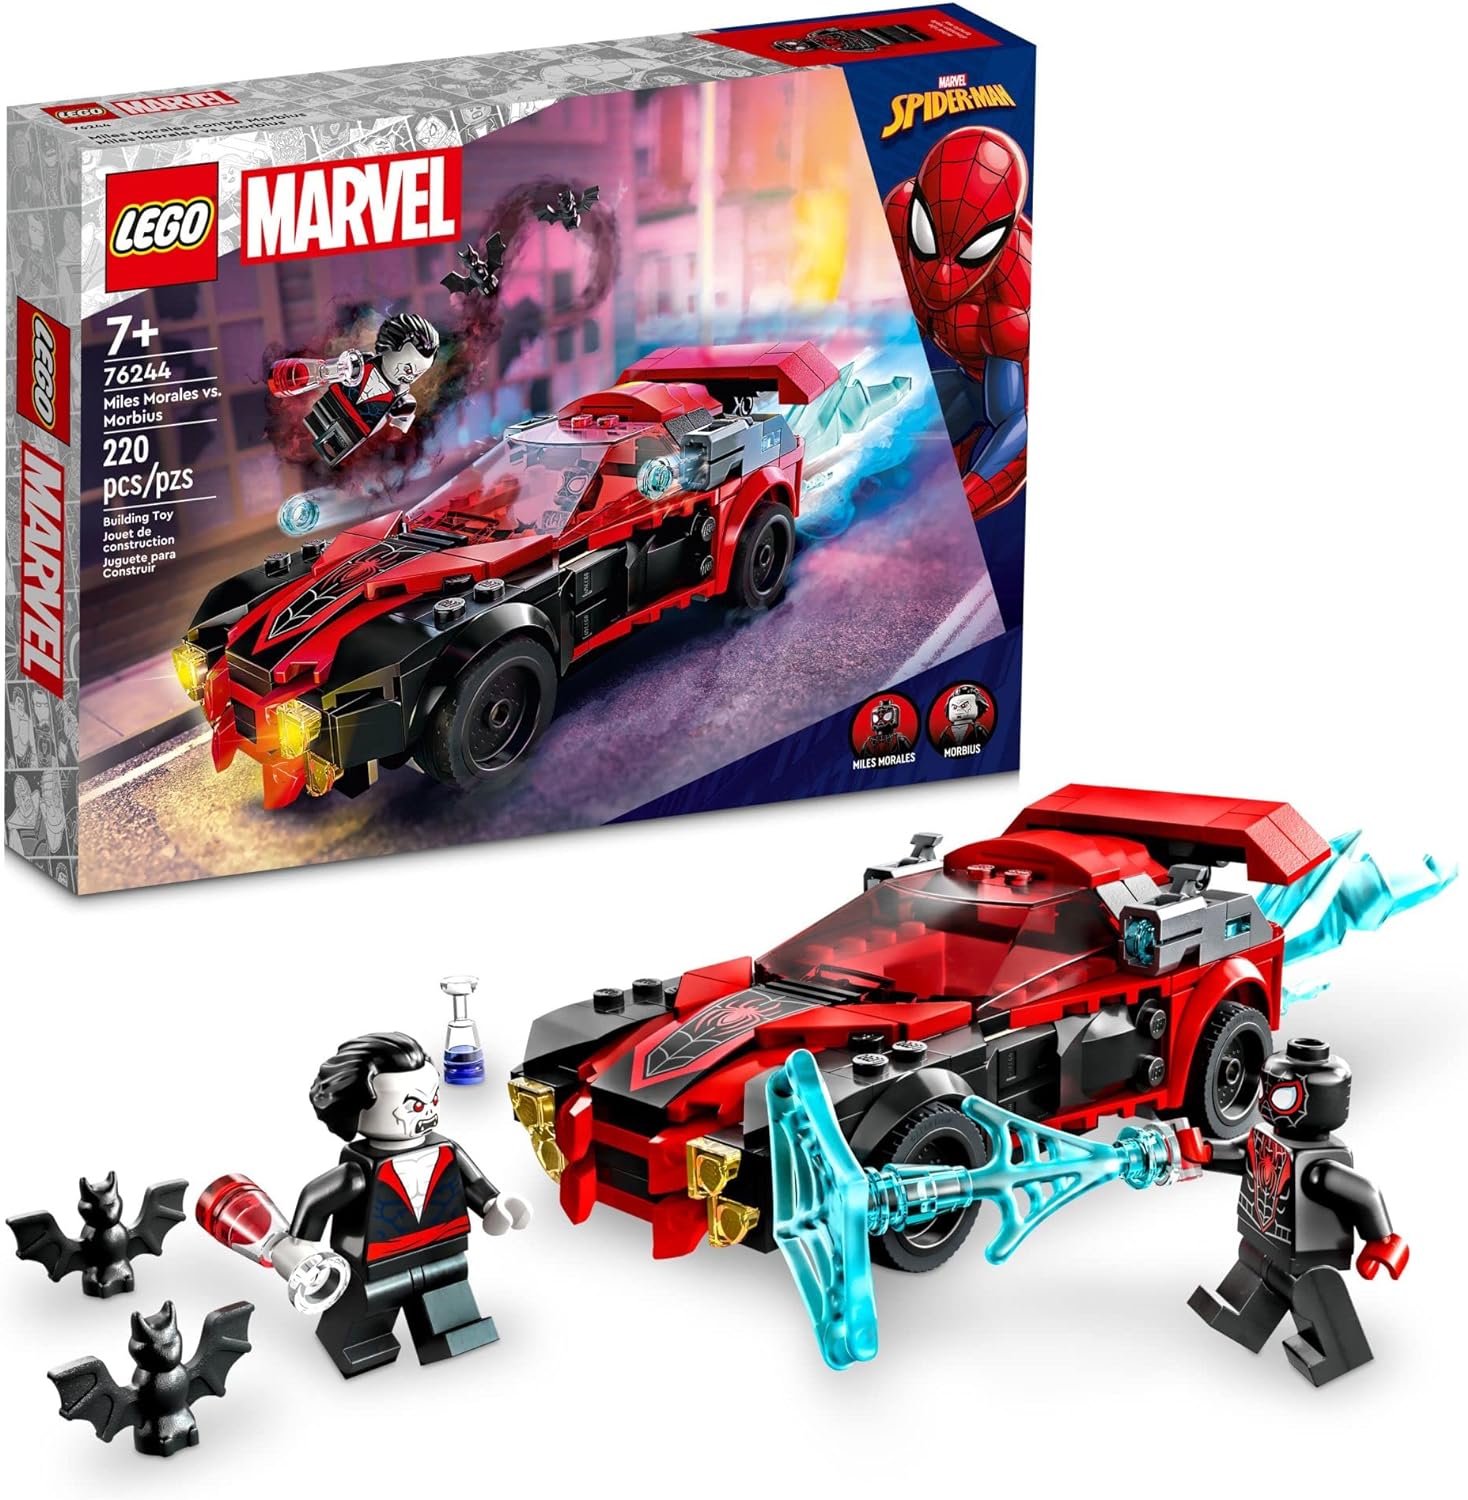 LEGO Marvel Spider-Man Miles Morales vs. Morbius 76244 Building Toy - Featuring Race Car and Action 